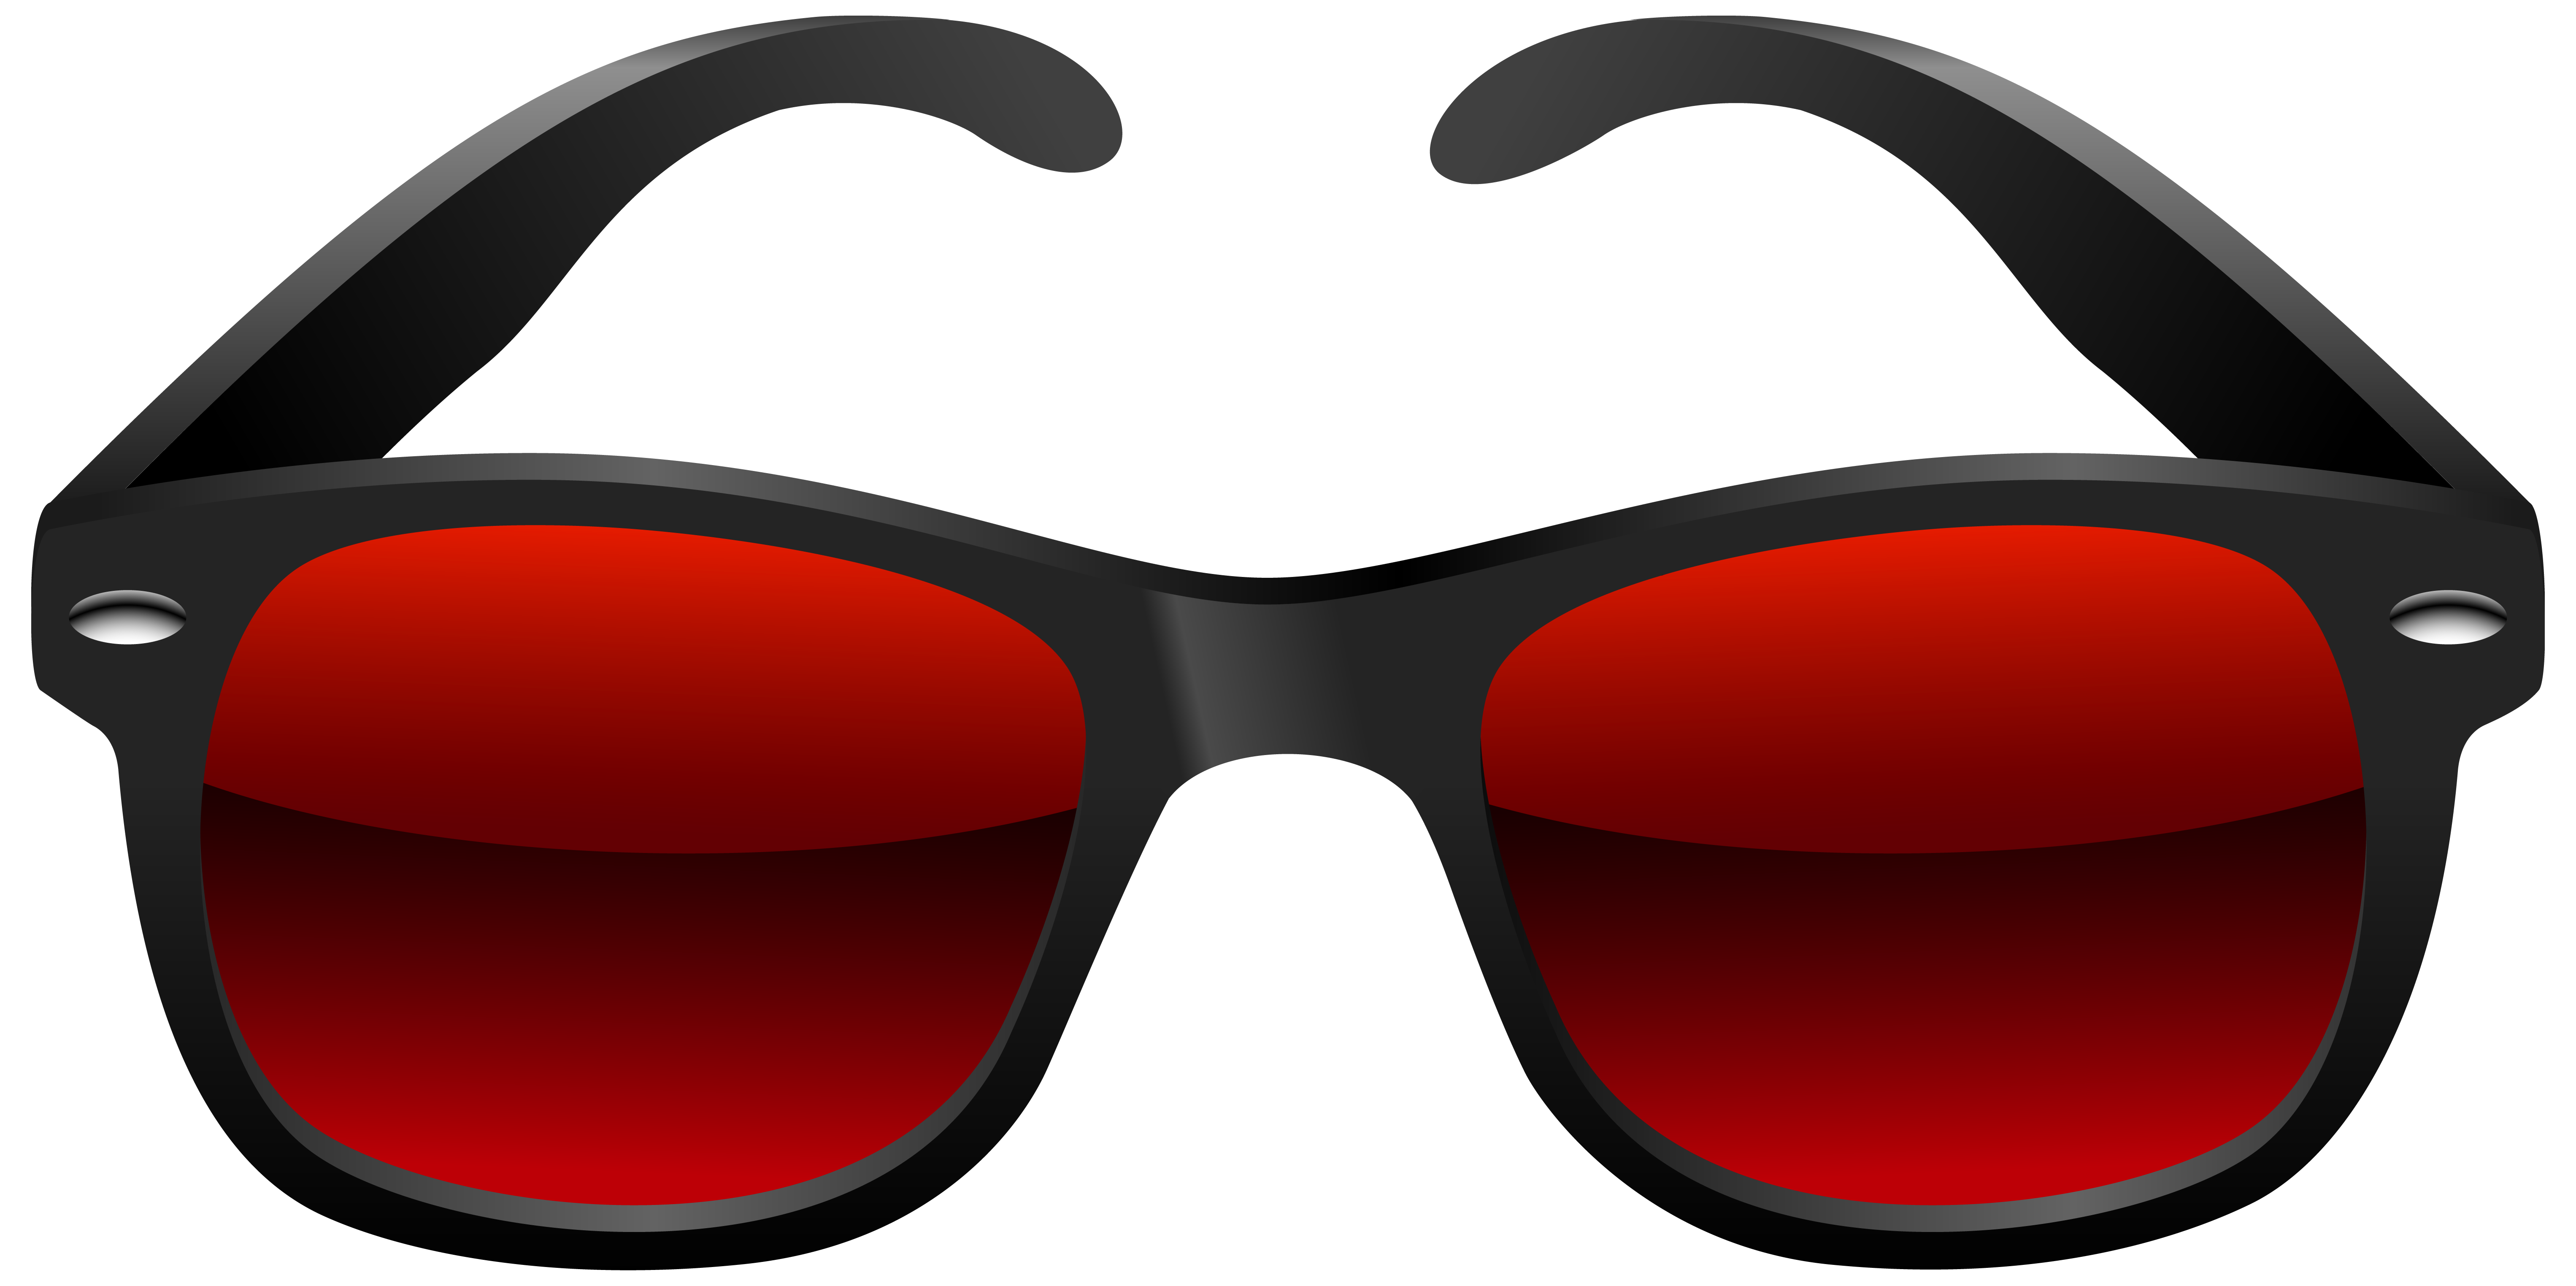 Sunglasses Clipart to Download - dbclipart.com